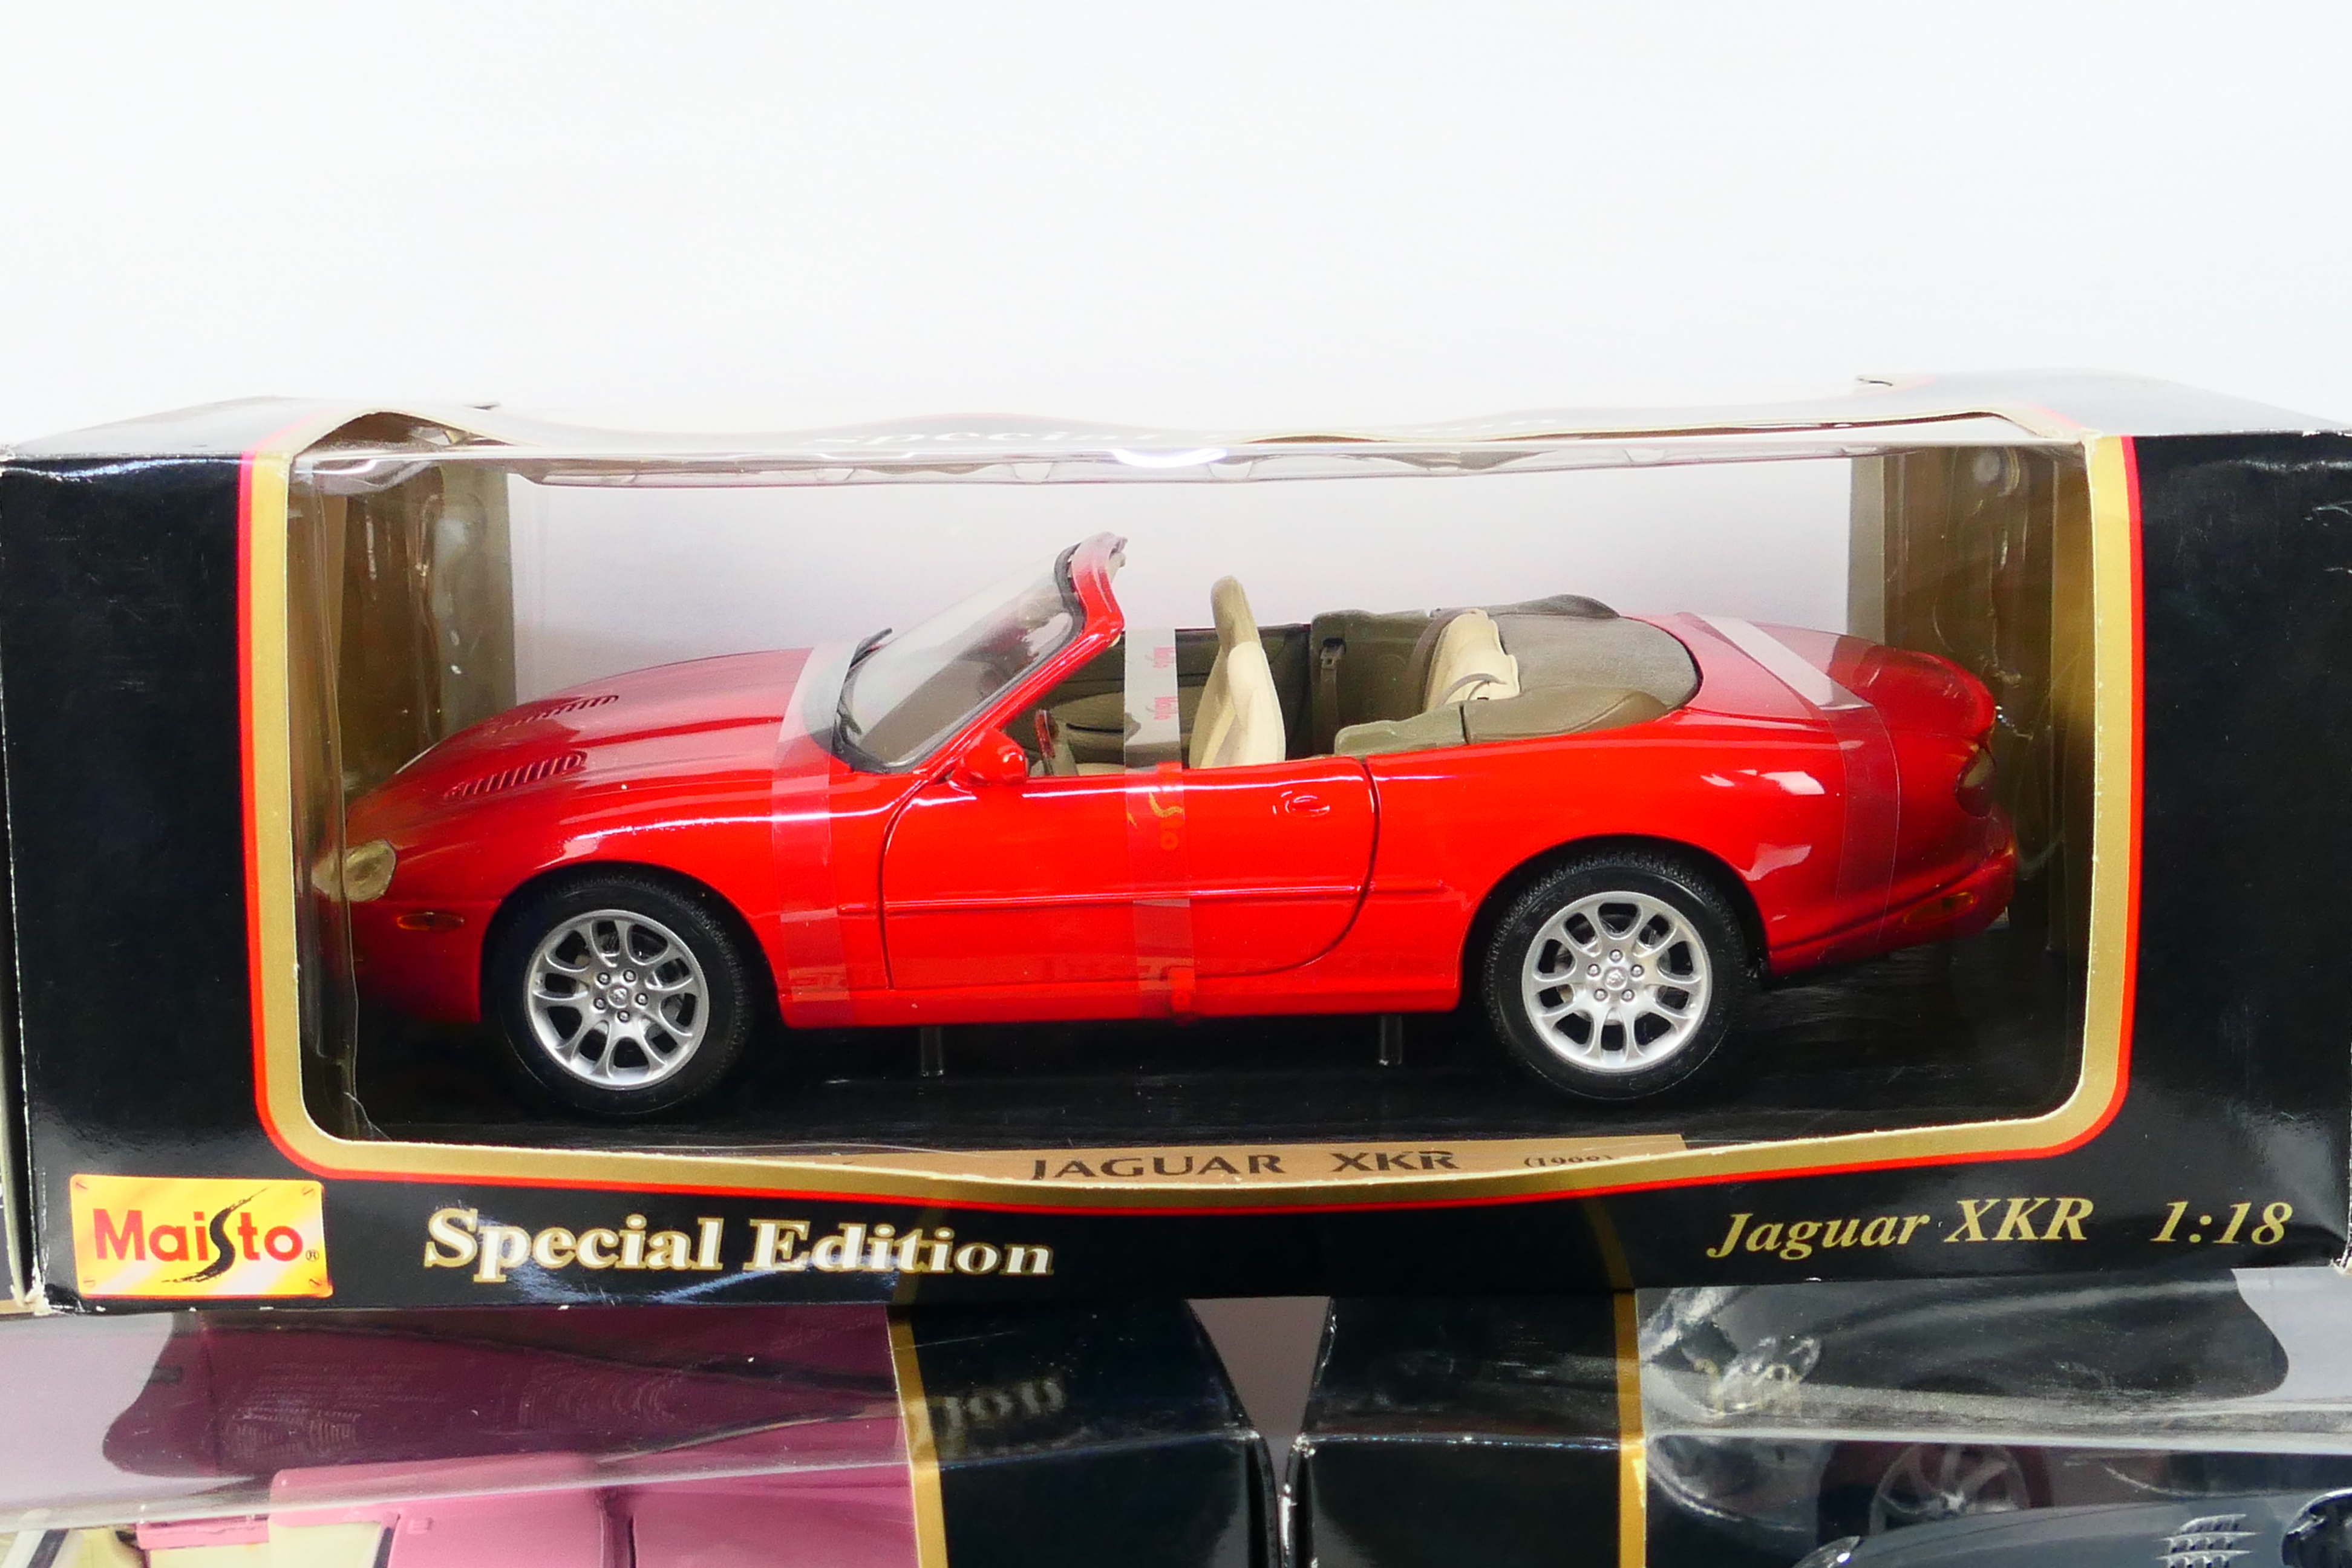 Maisto - Three boxed diecast 1:18 scale model cars. - Image 2 of 4